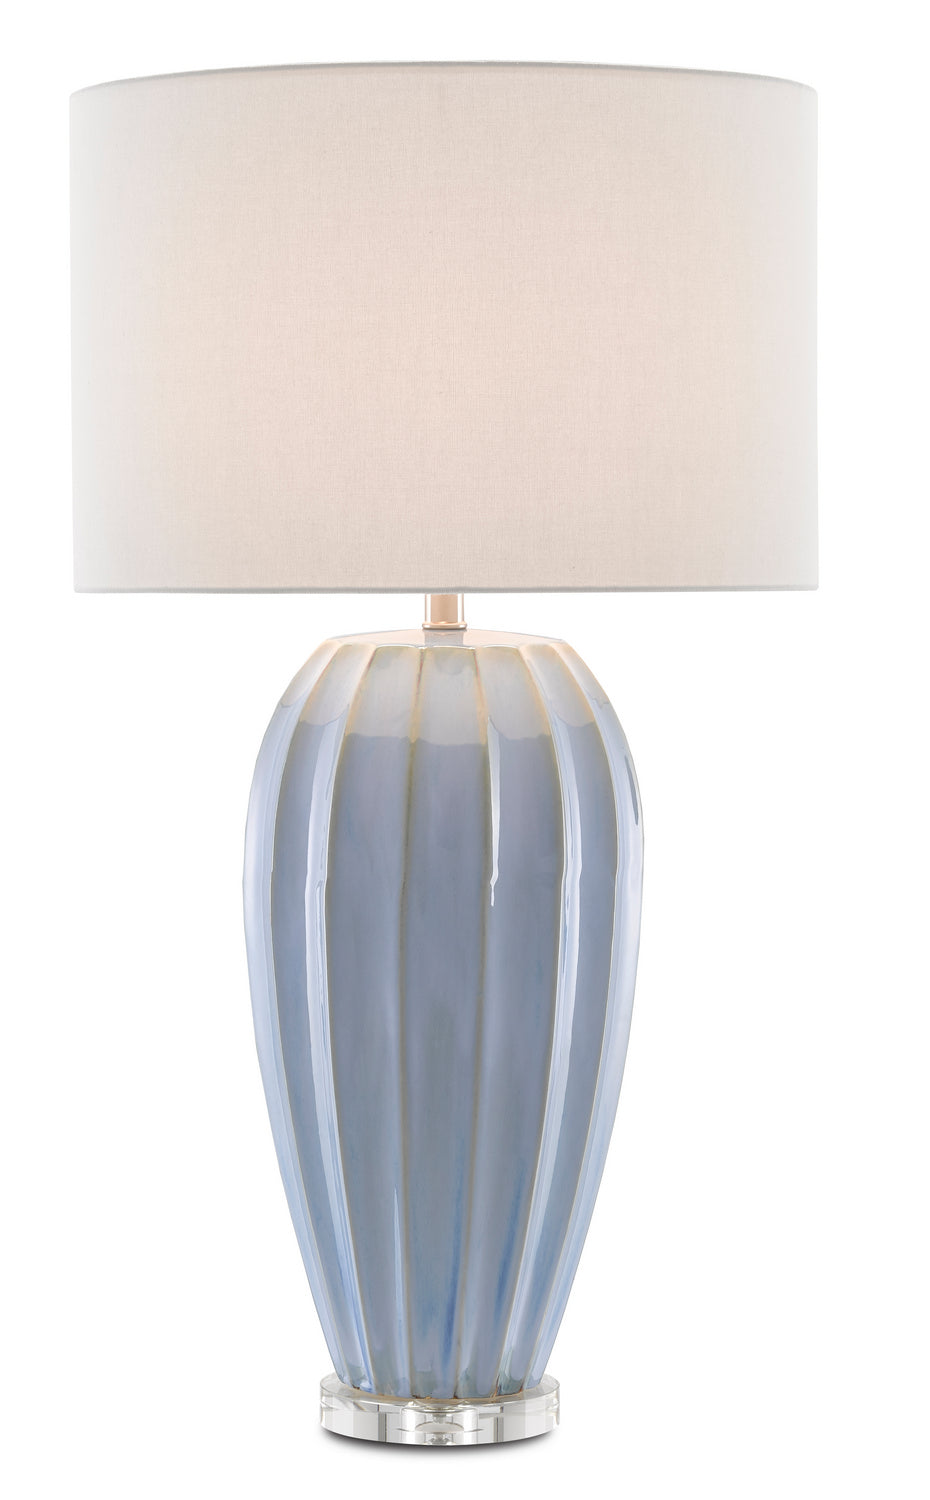 One Light Table Lamp from the Bluestar collection in Light Blue/Clear finish